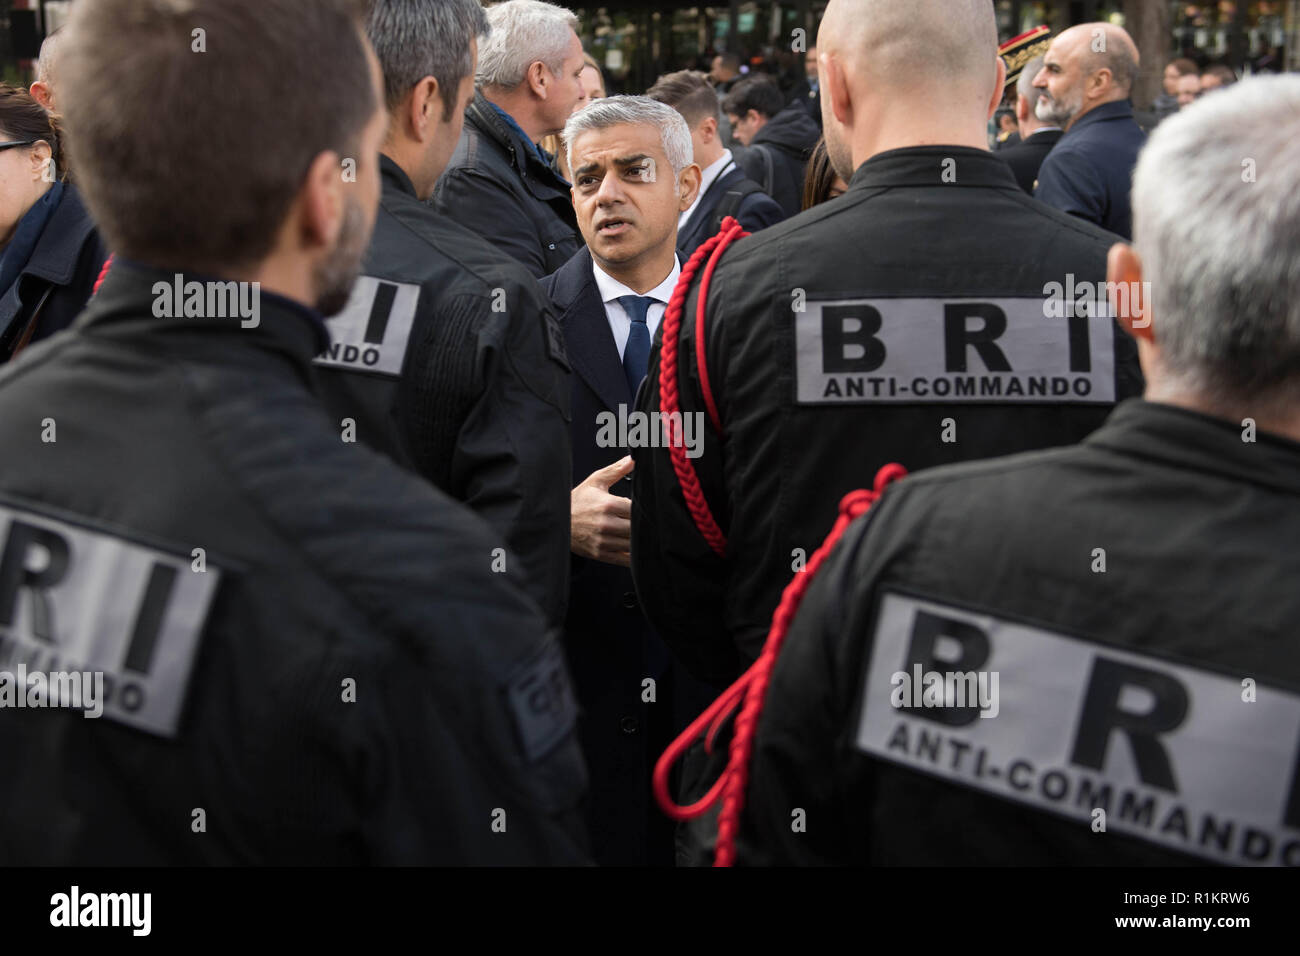 Mayor of London Sadiq Khan and his Parisian counterpart, Anne Hidalgo, attend a memorial service to mark the third anniversary of the Bataclan terrorist attack in Paris where they met victims and emergency services. Stock Photo